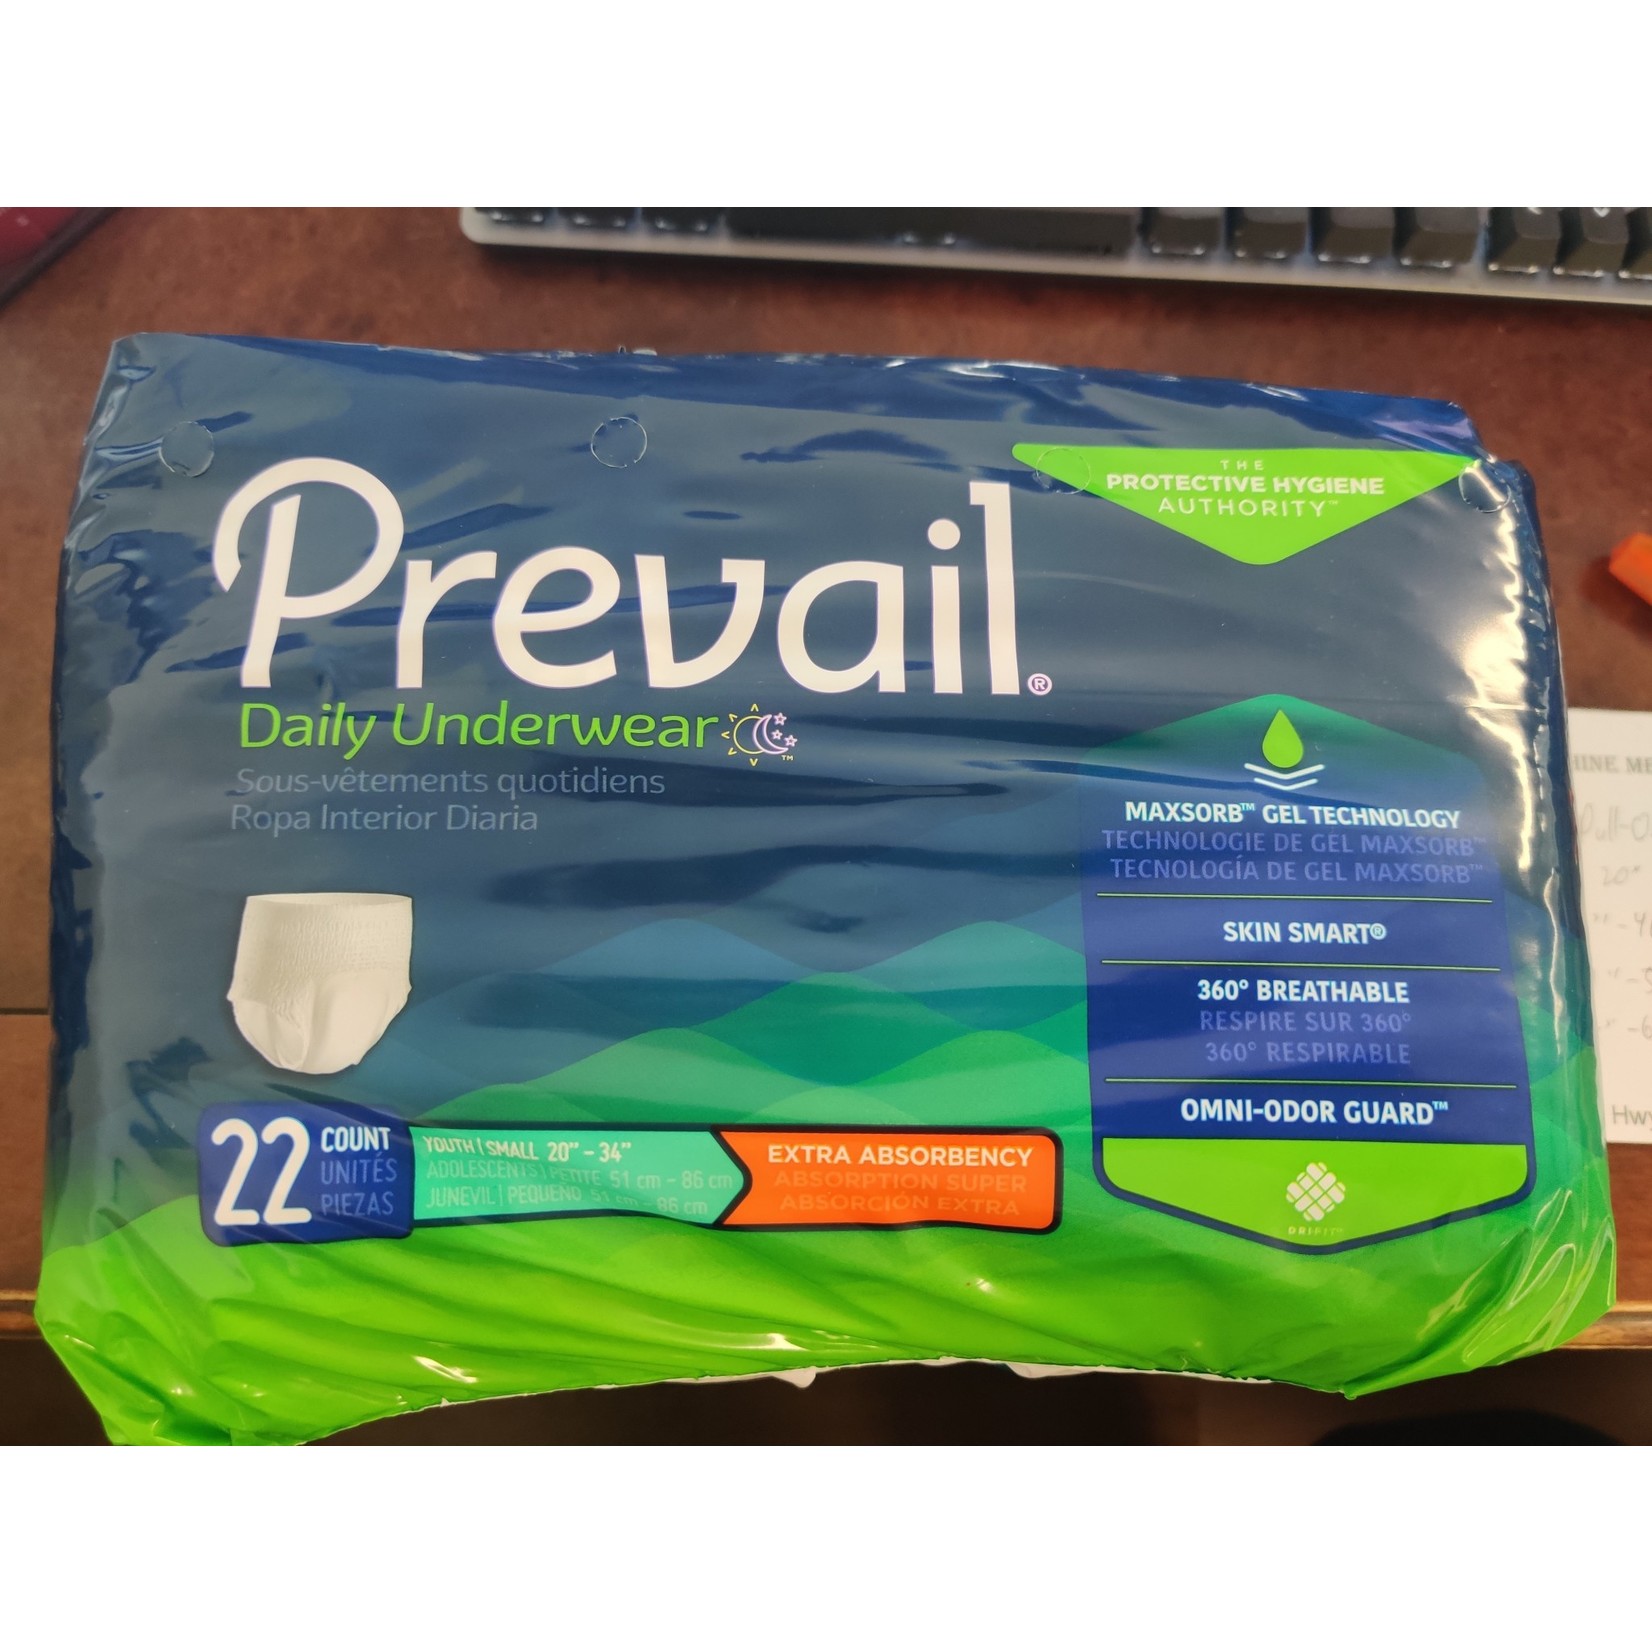 Prevail Pull-On Daily Underwear - Sunshine Medical Equipment